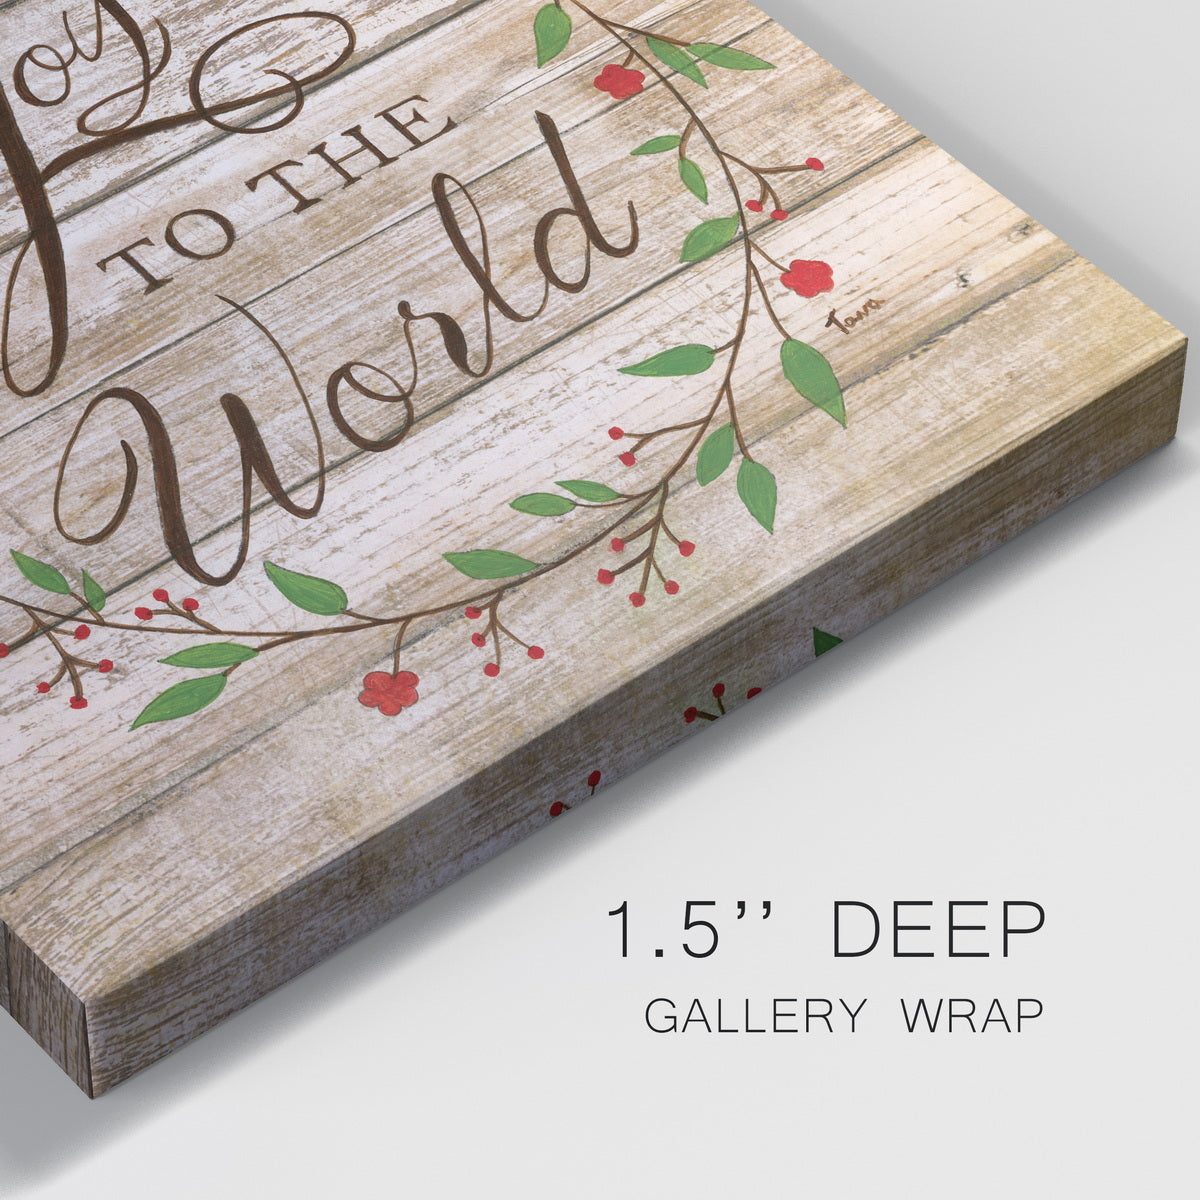 Joy To The World-Premium Gallery Wrapped Canvas - Ready to Hang